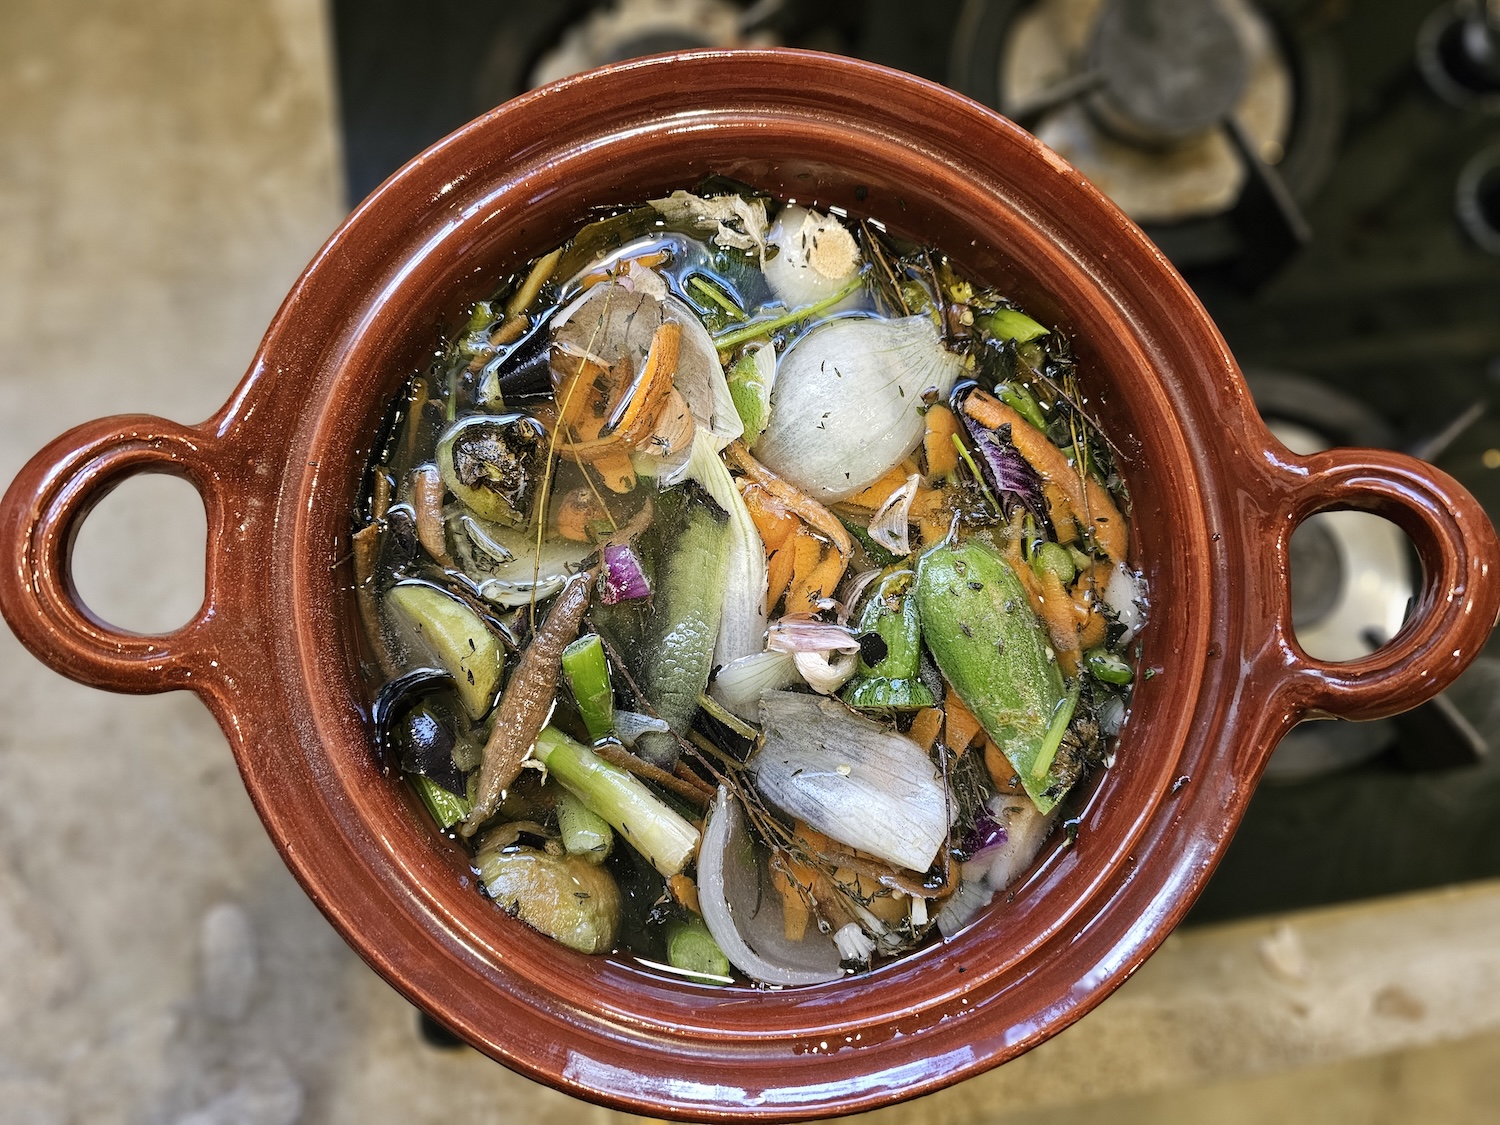 Pot on the stove with scraps - how to make vegetable broth from vegetable scraps